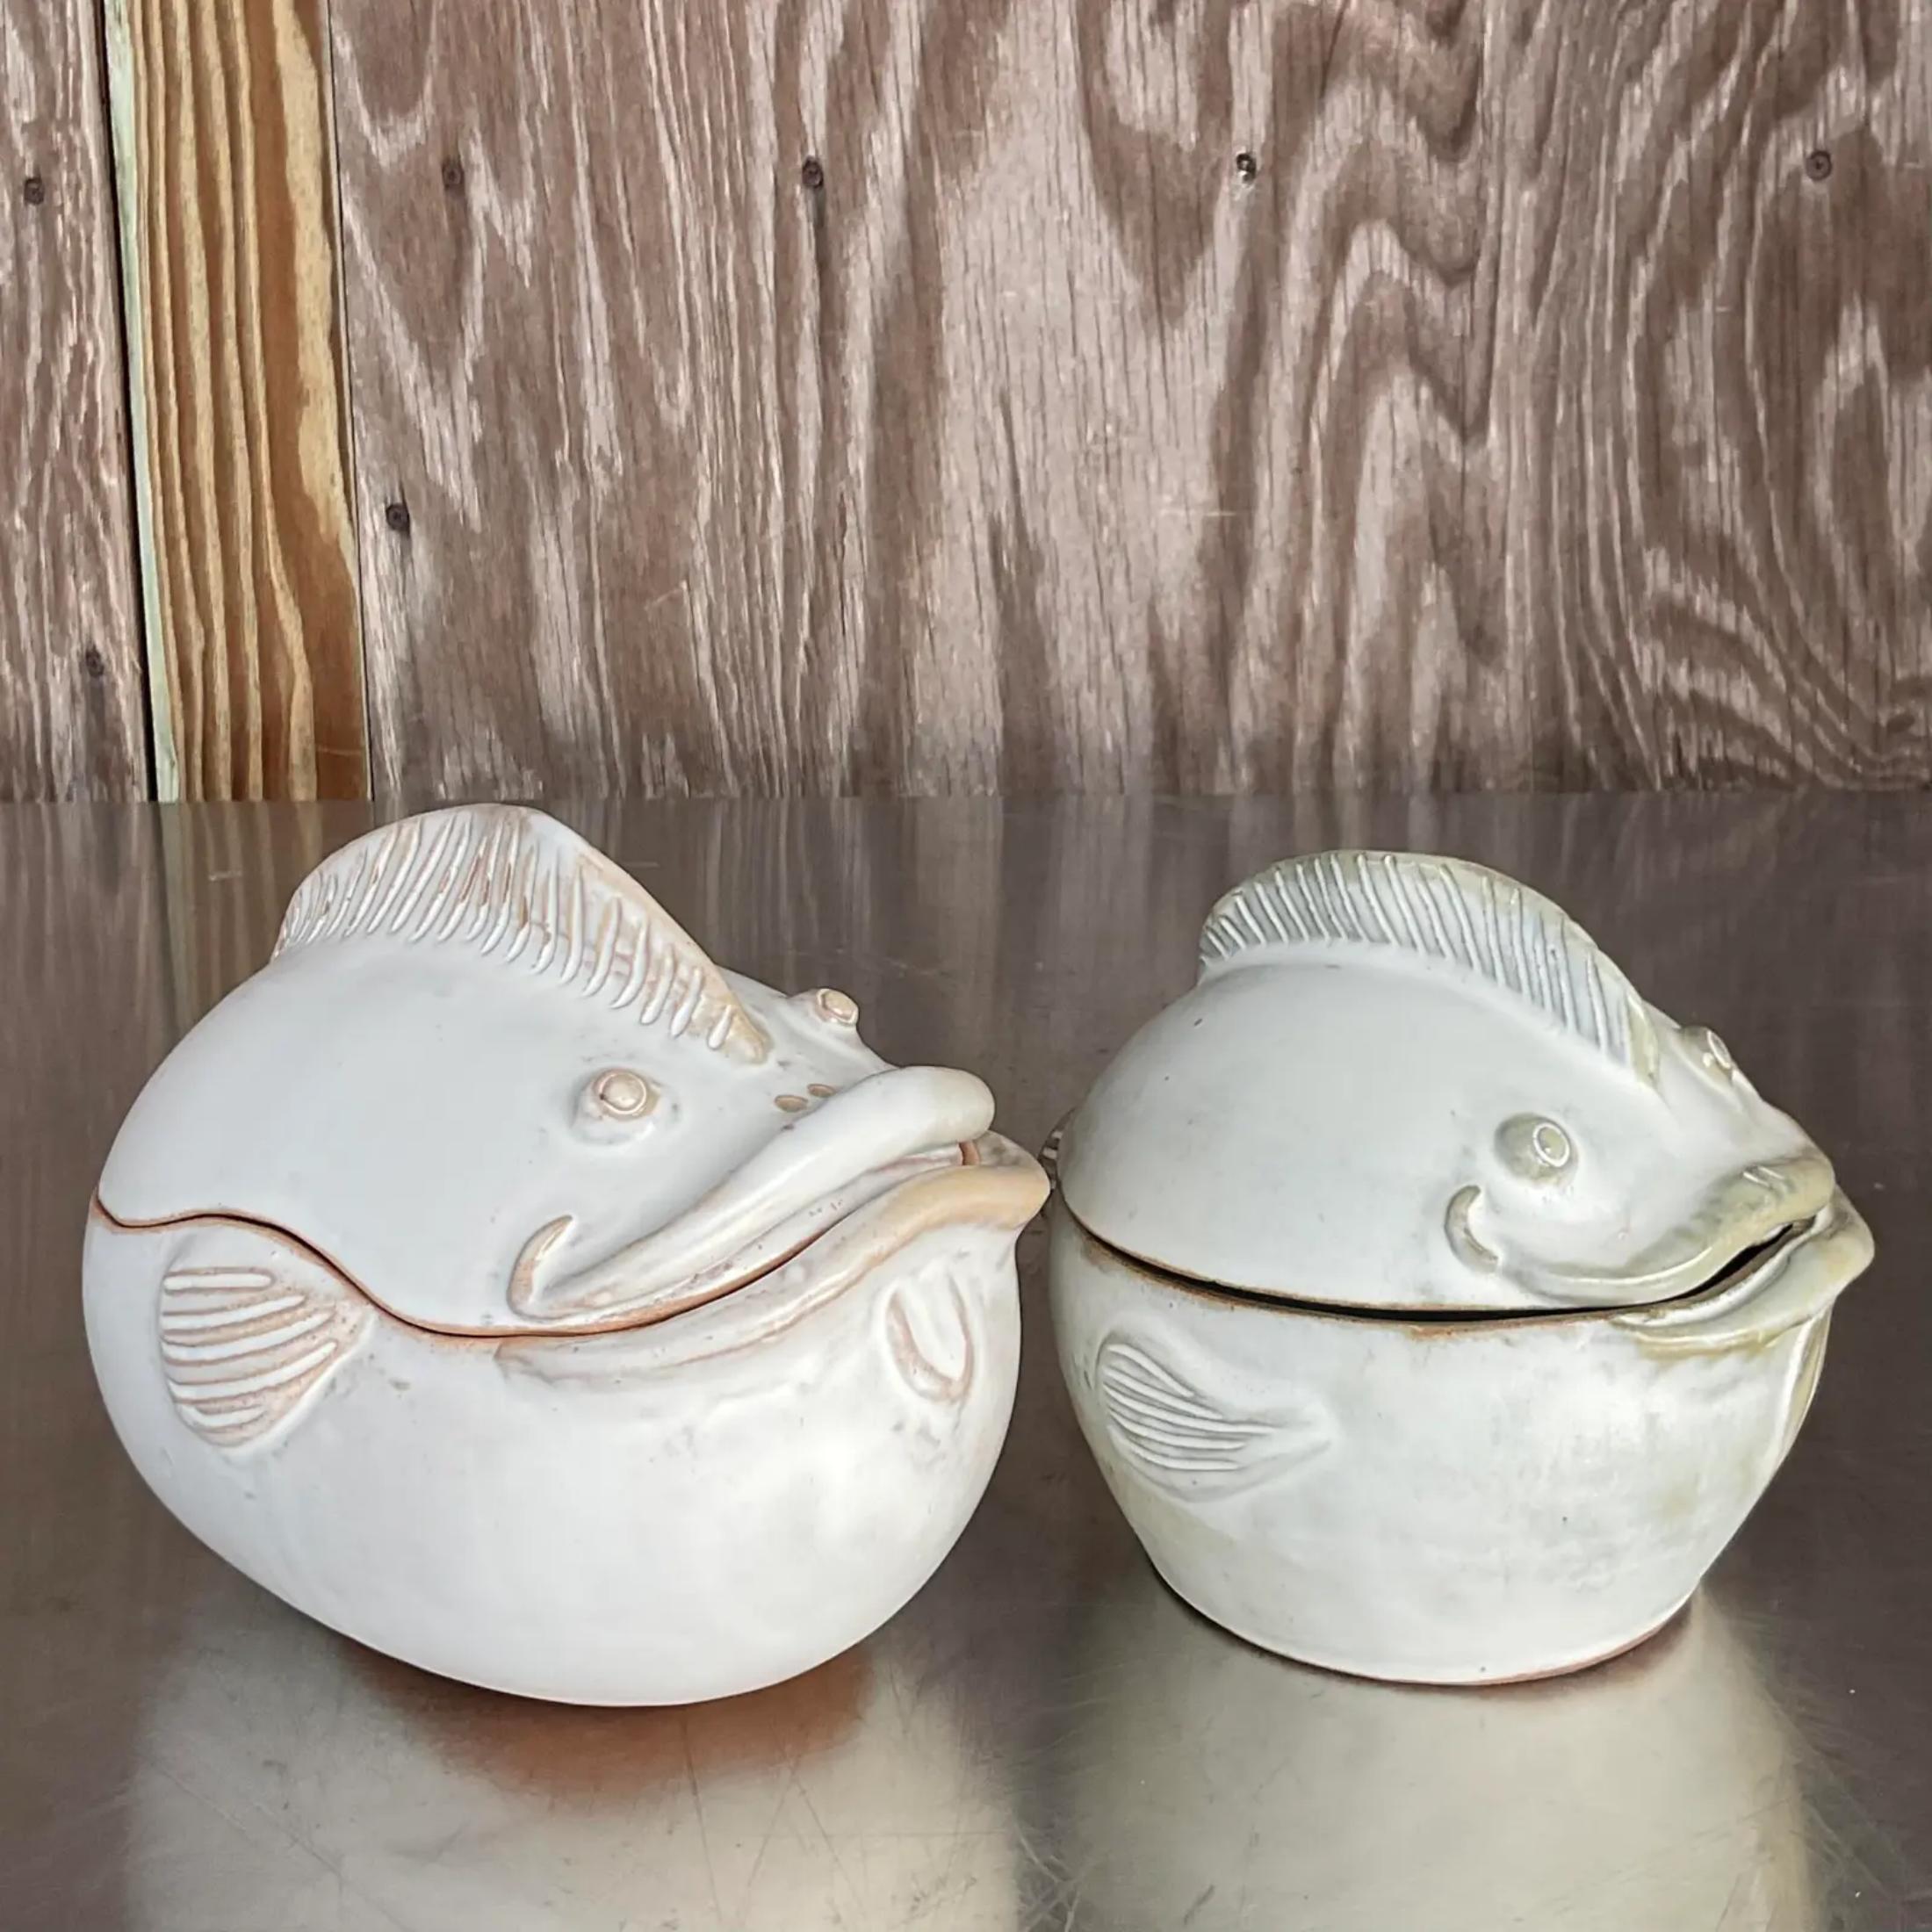 A charming pair of signed studio pottery lidded bowls. Two handsome fish with great expressions. Signed on the bottom. A third larger matching piece also available on my Chairish page. Acquired from a Palm Beach estate